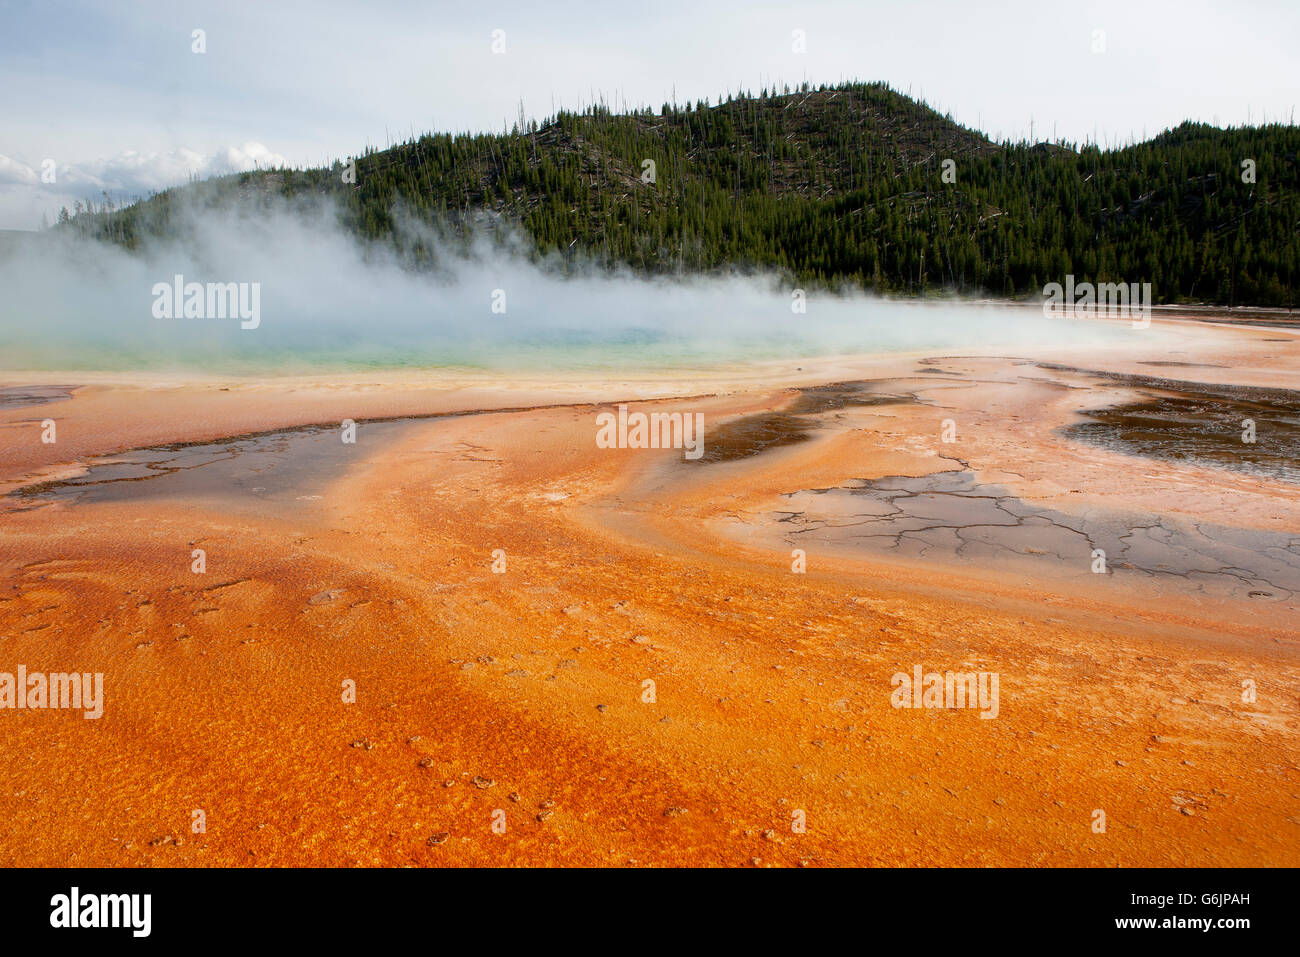 Hot spring in Yellowstone National Park, Wyoming, USA Stock Photo